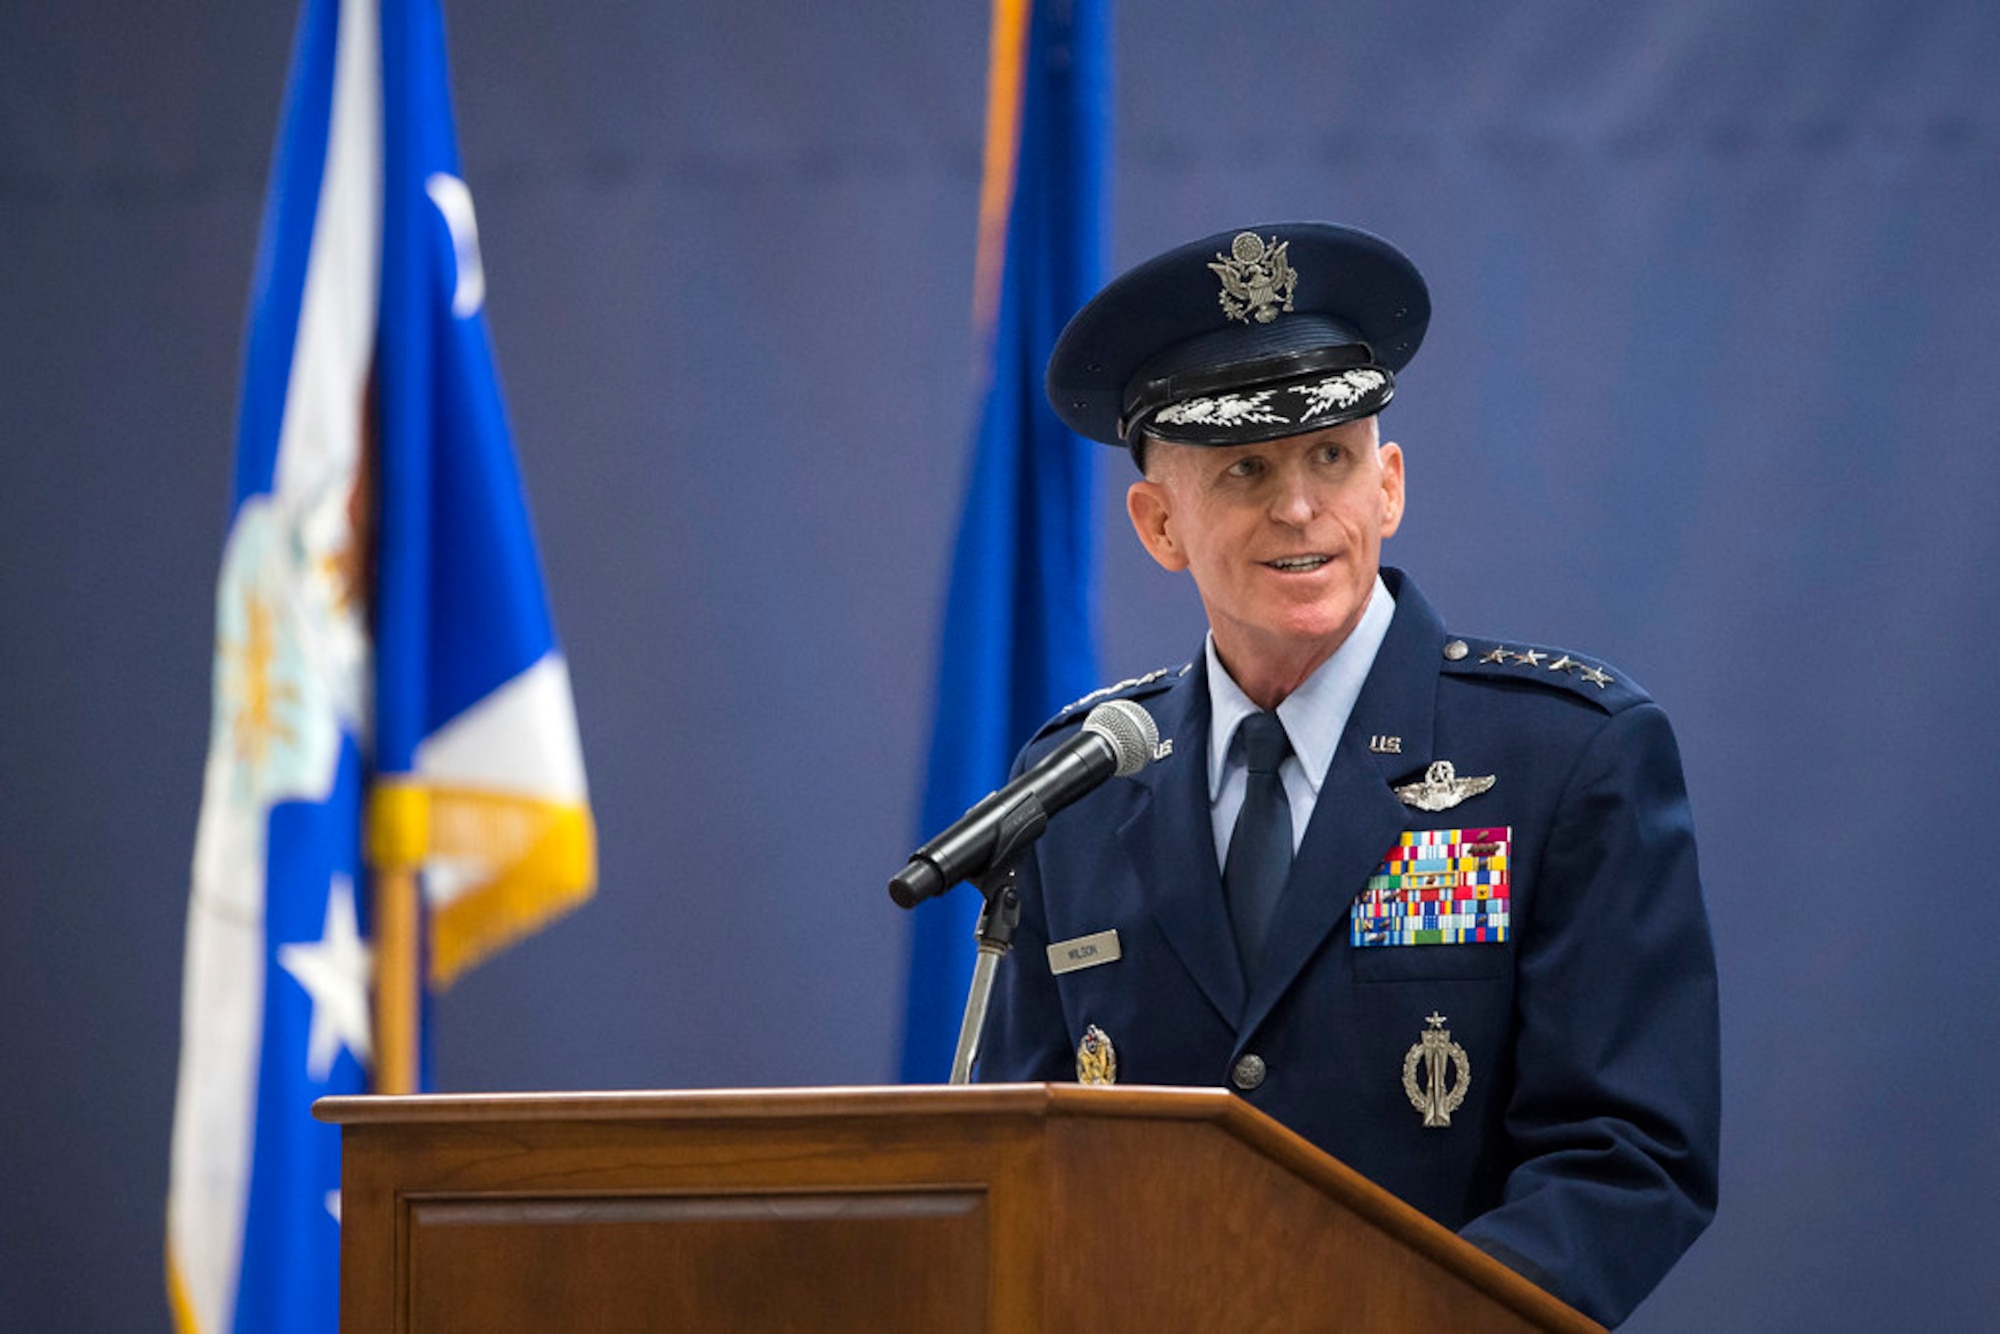 Air Force Vice Chief of Staff Gen. Stephen W. Wilson delivers remarks as he presides over the Air Force District of Washington Change of Command Ceremony at Joint Base Andrews, Md., July 9, 2019. (Air Force Photo by Adrian Cadiz)